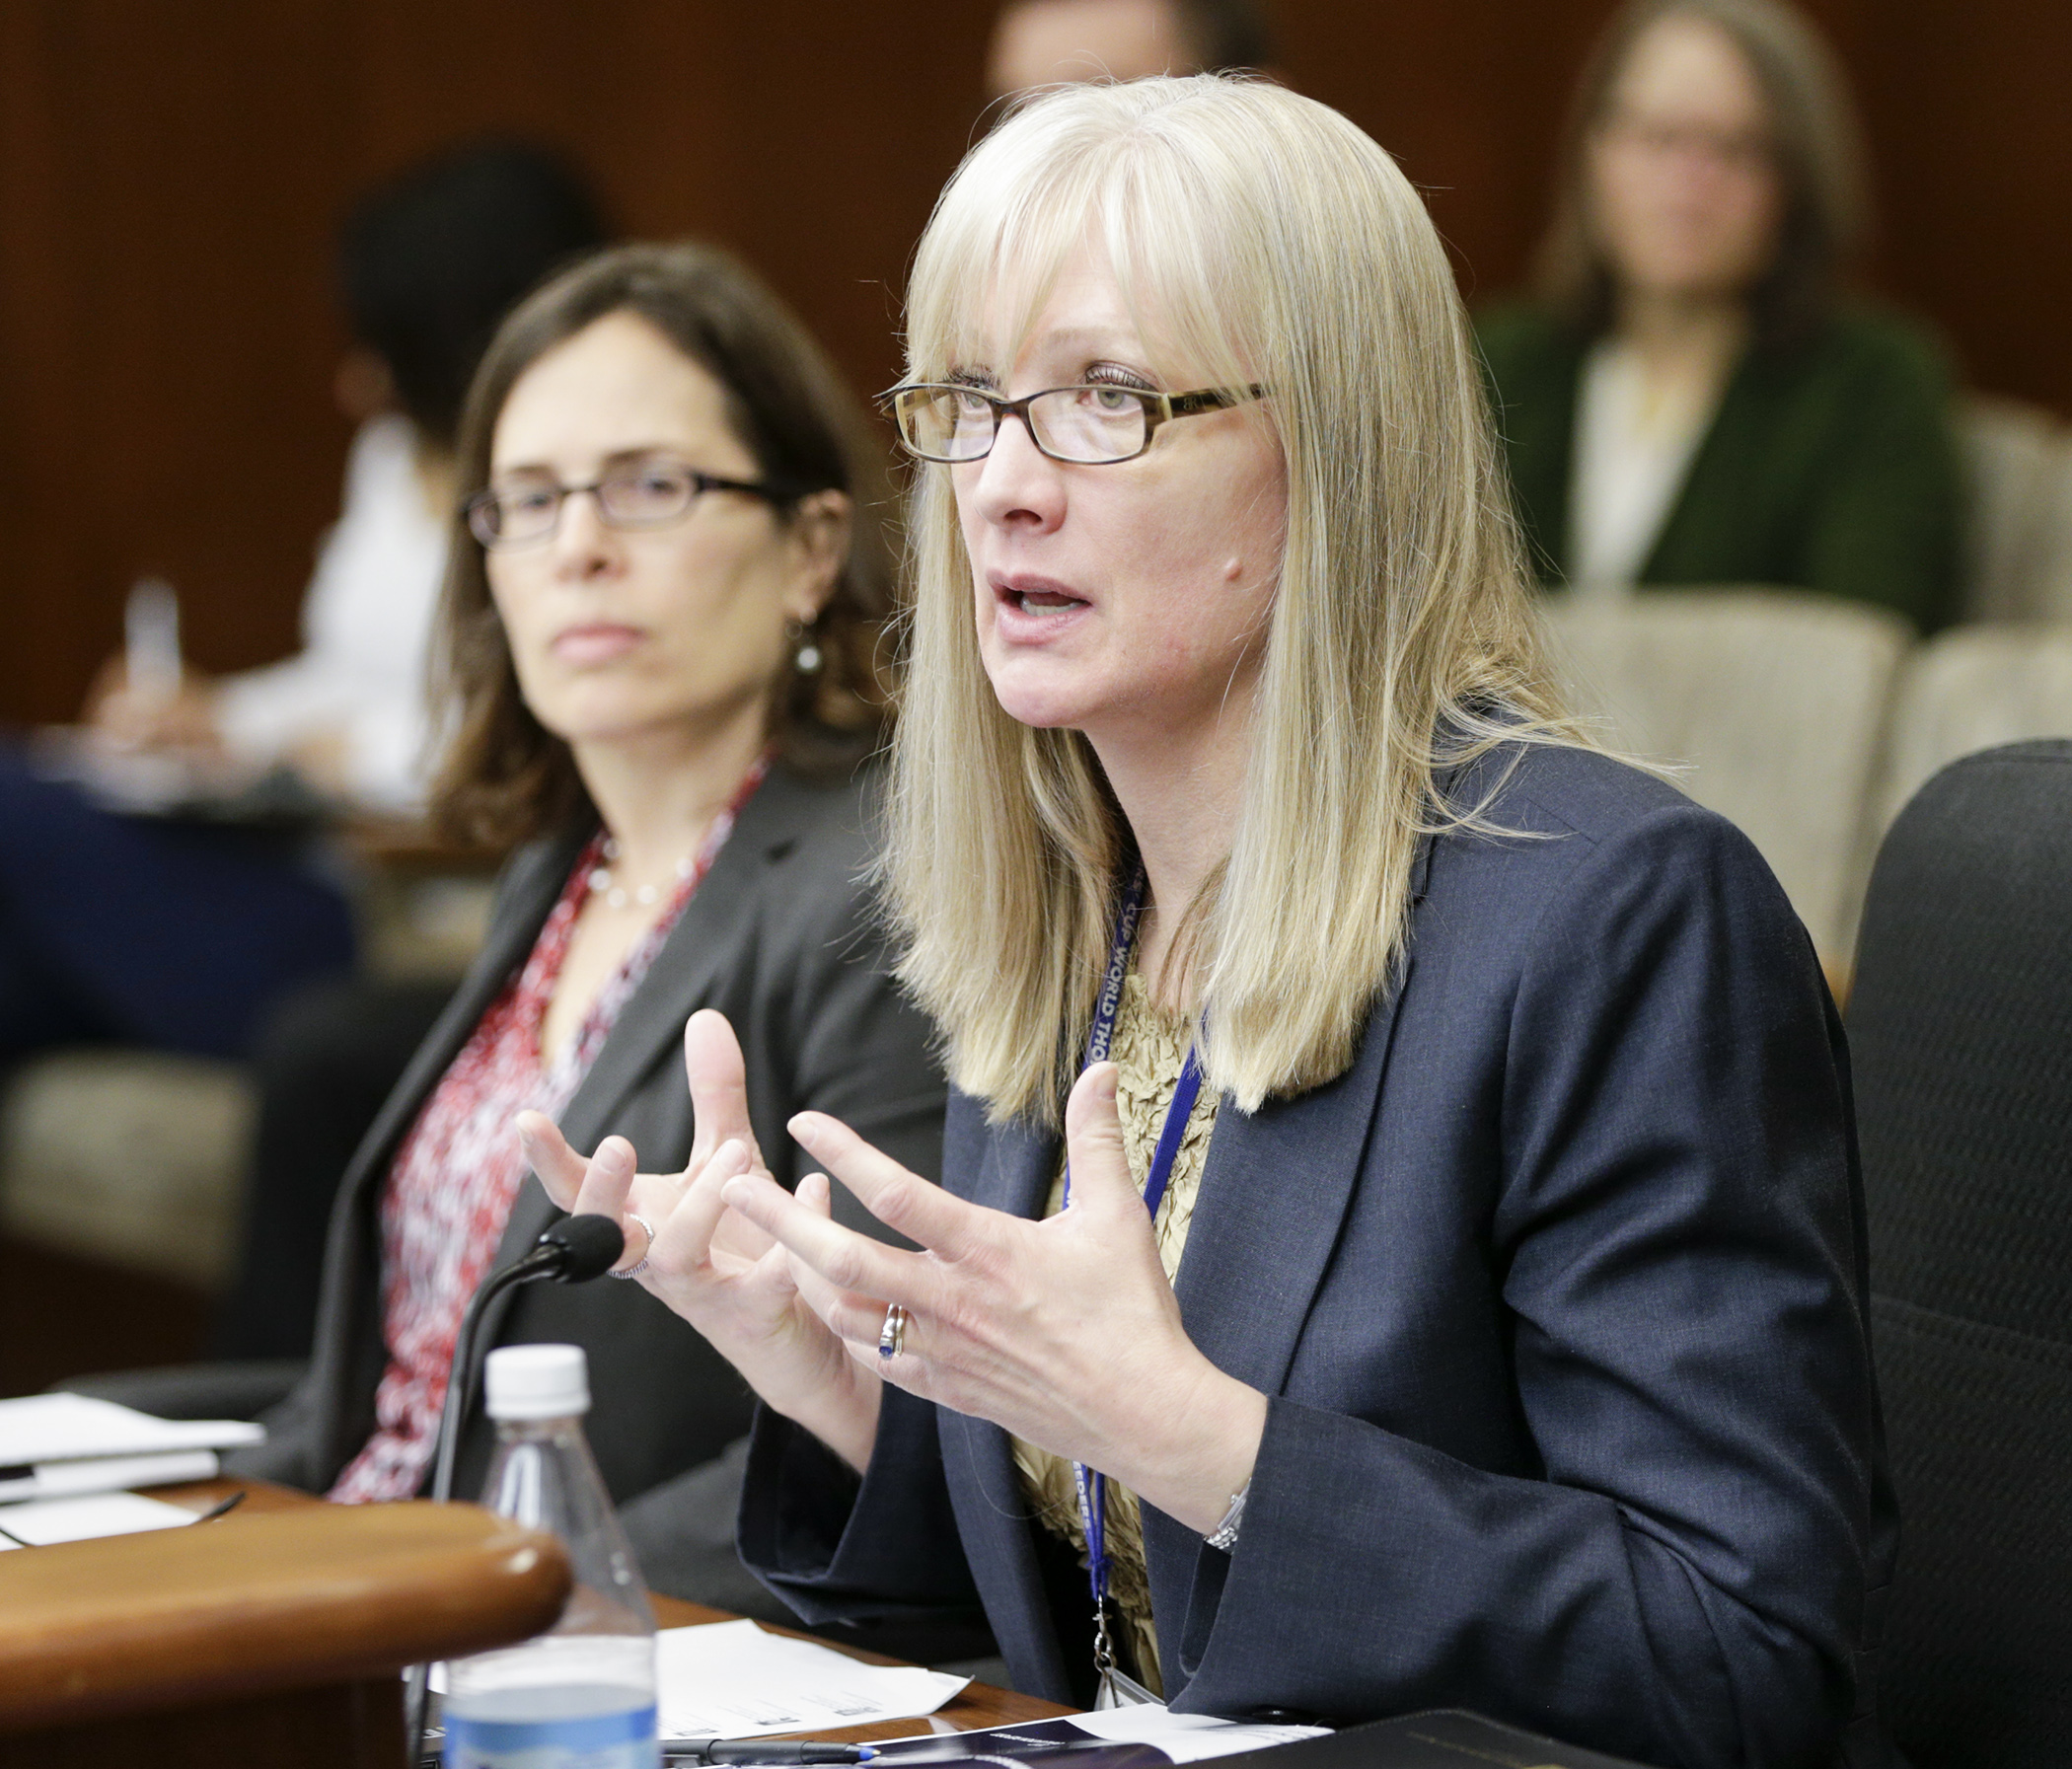 Valerie Bombach, program evaluator with the Office of the Legislative Auditor, answers a question during testimony before the House Education Innovation Committee April 4, regarding the OLA’s evaluation of the Minnesota State High School League. Photo by Paul Battaglia